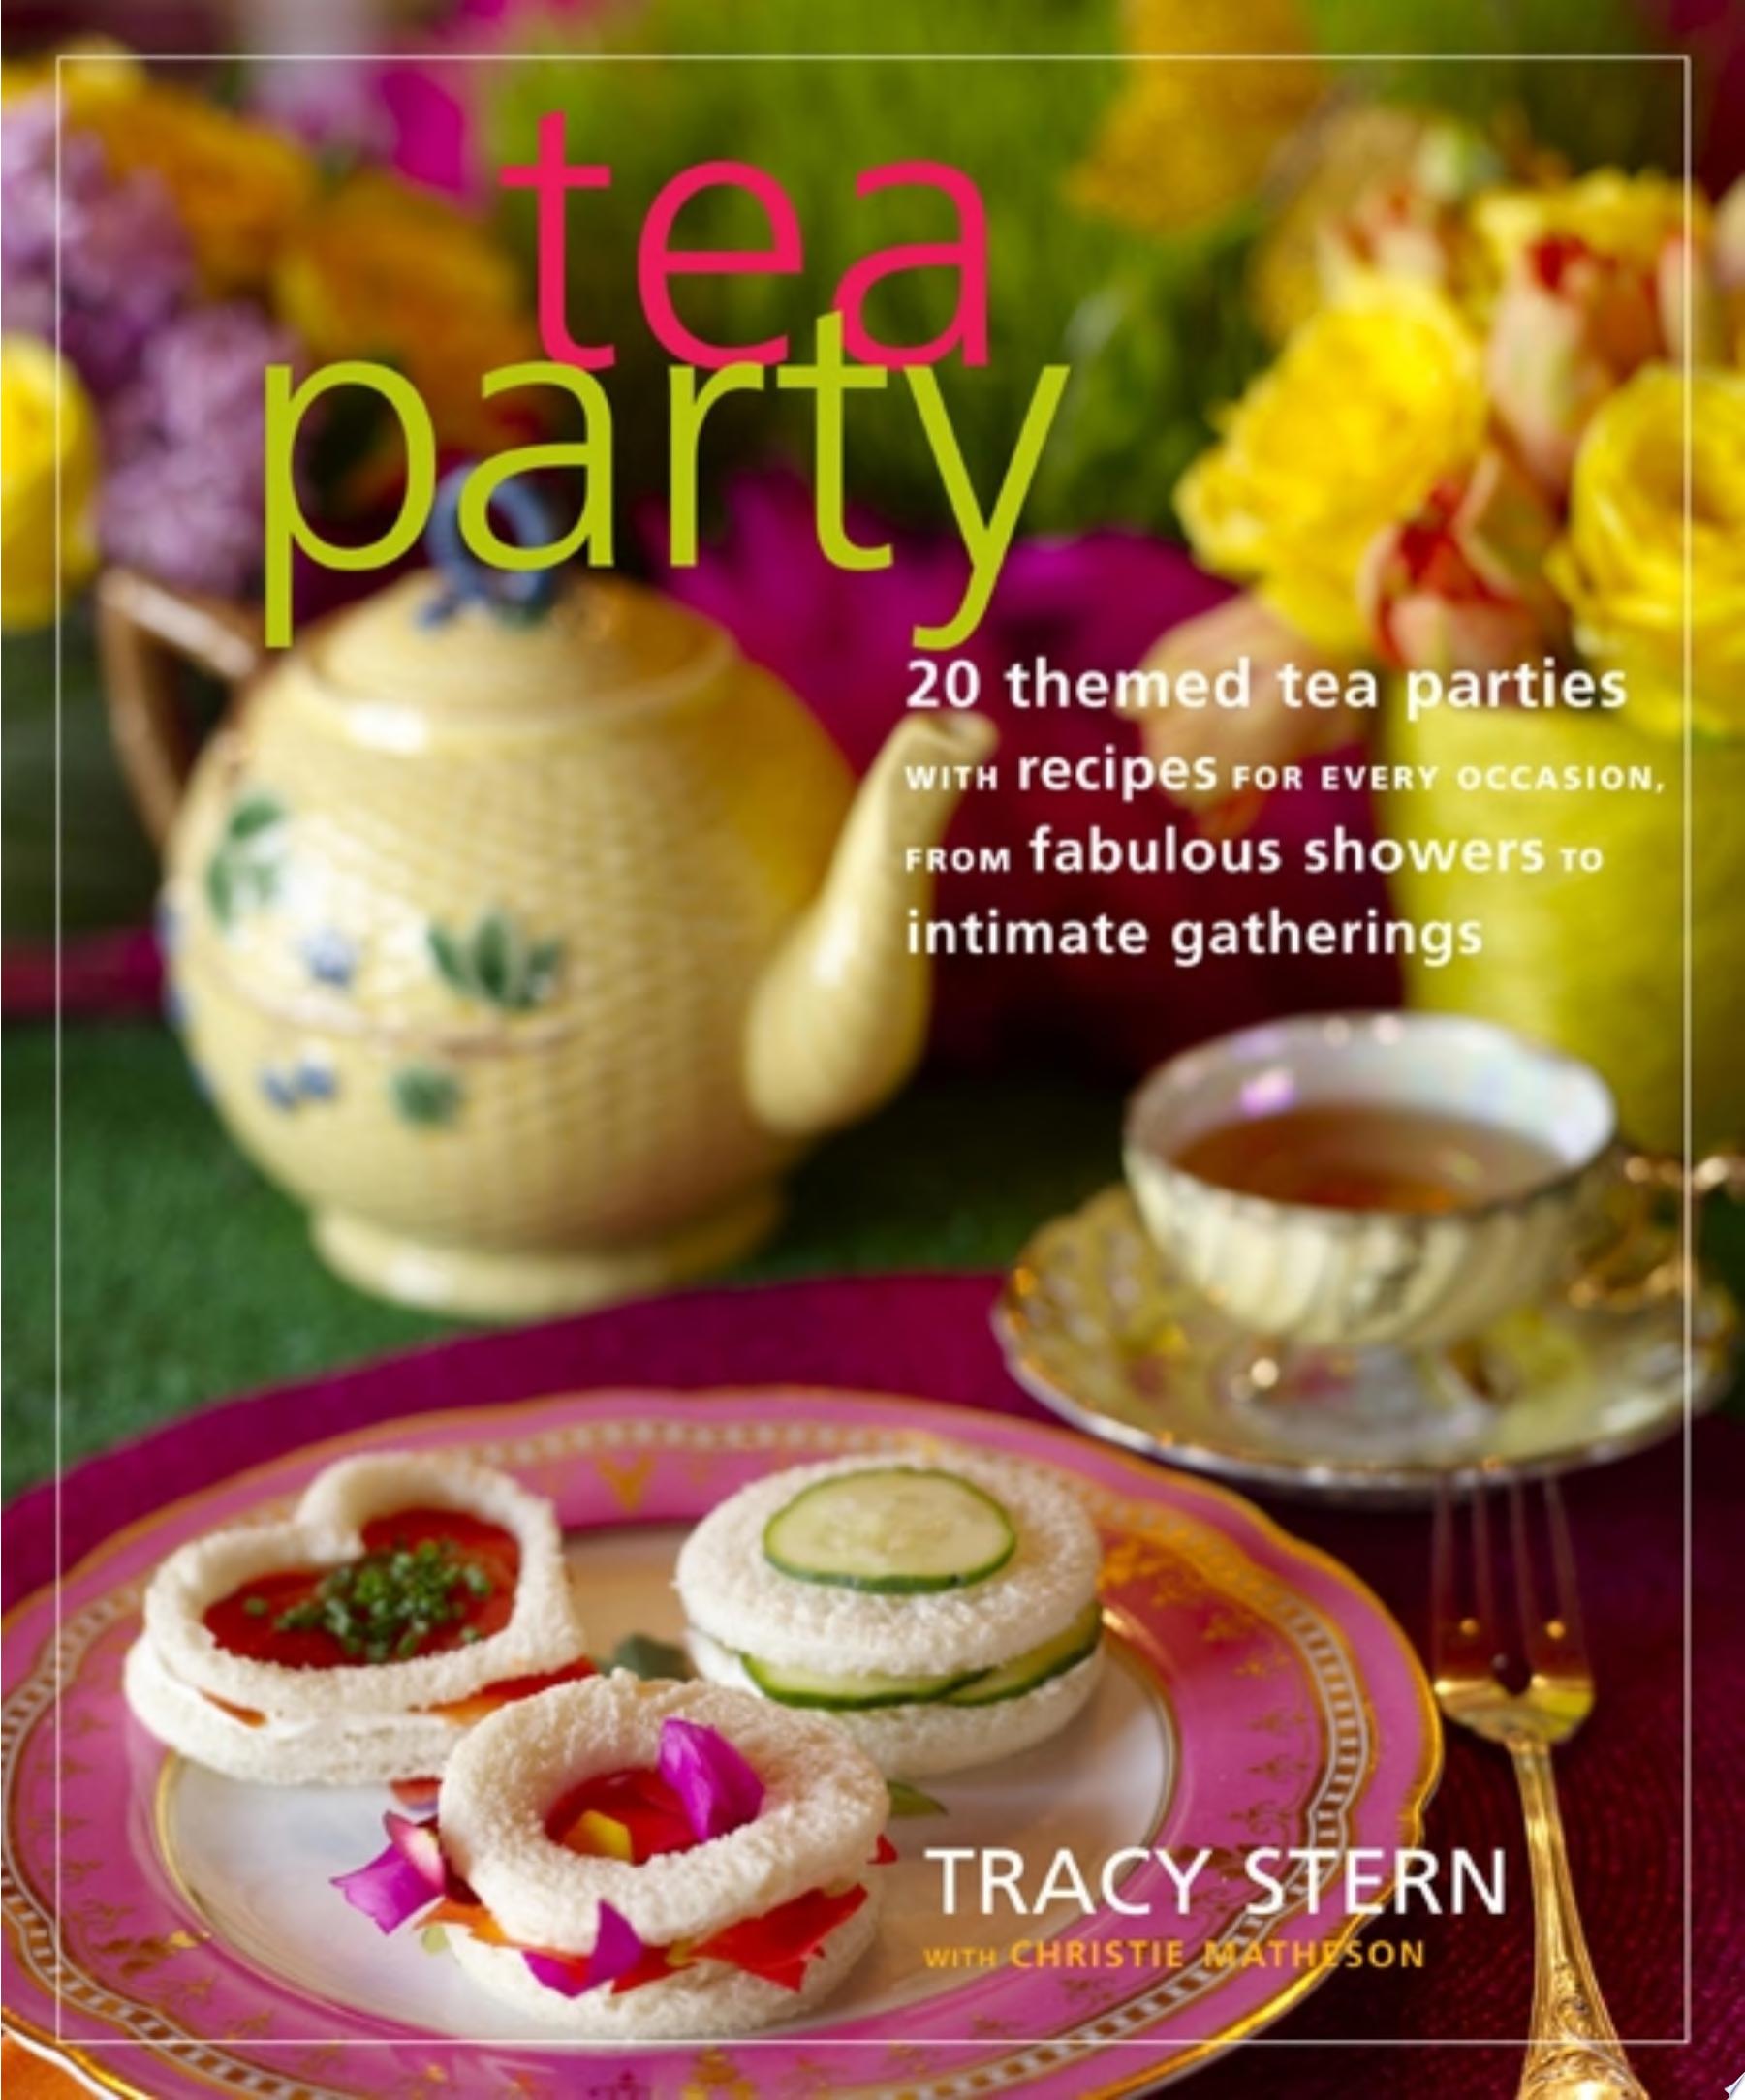 Image for "Tea Party"